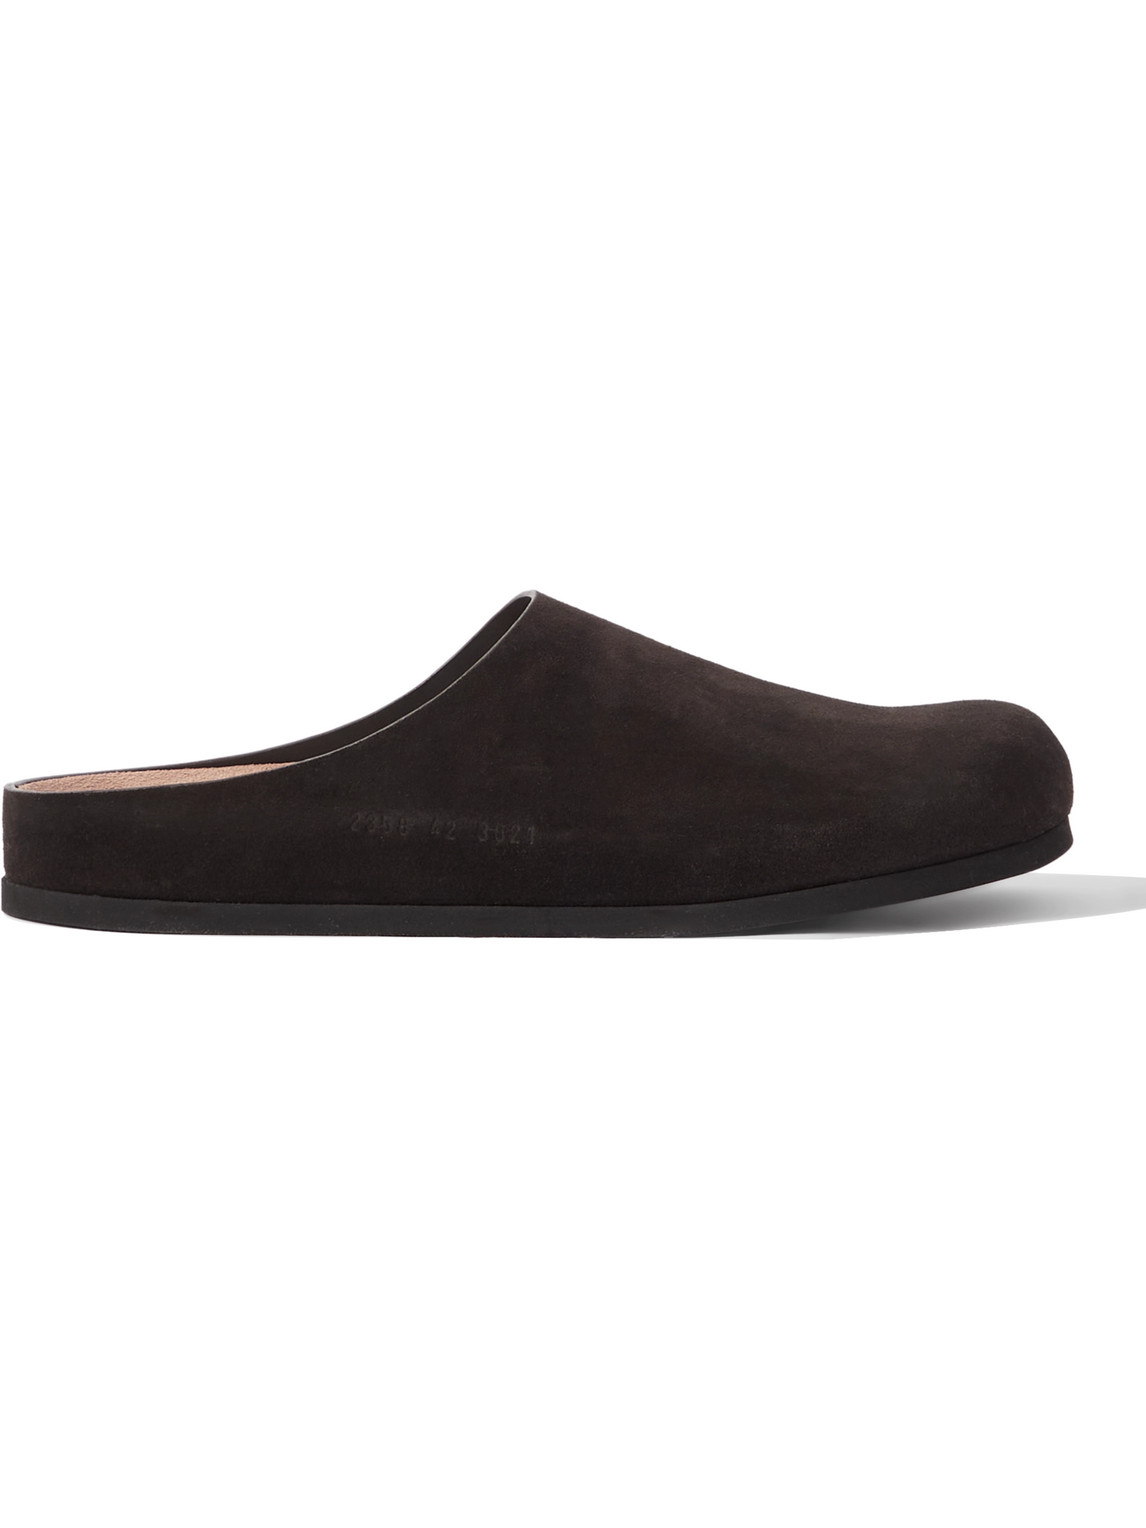 COMMON PROJECTS LOGO-DEBOSSED SUEDE CLOGS